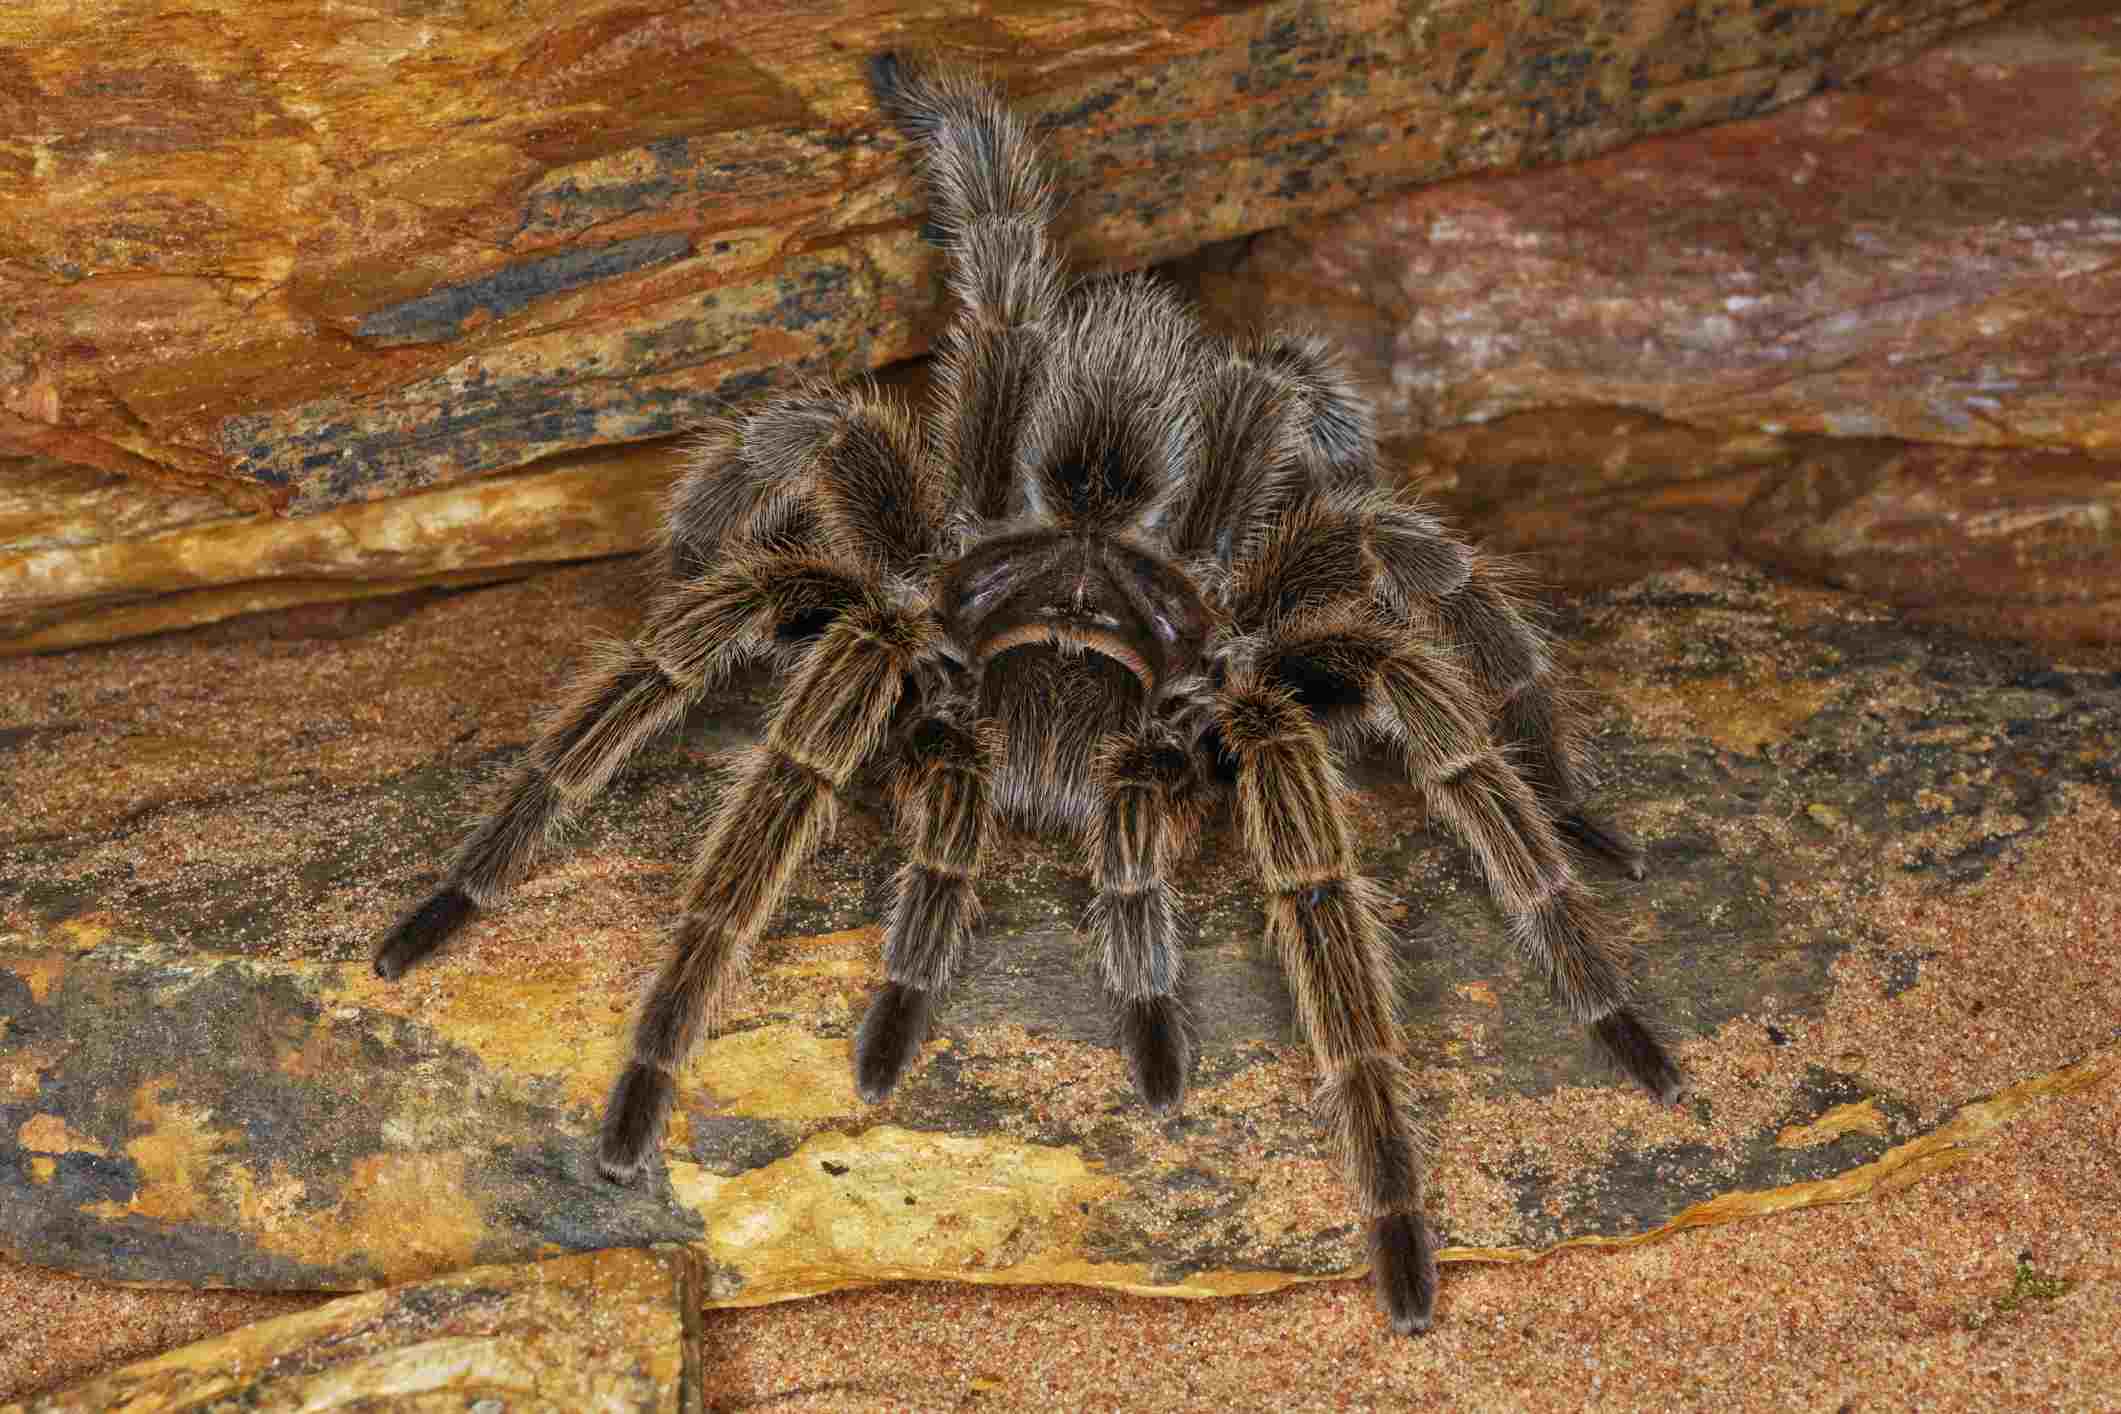 Chilean rose haired tarantula on red rocks and sand